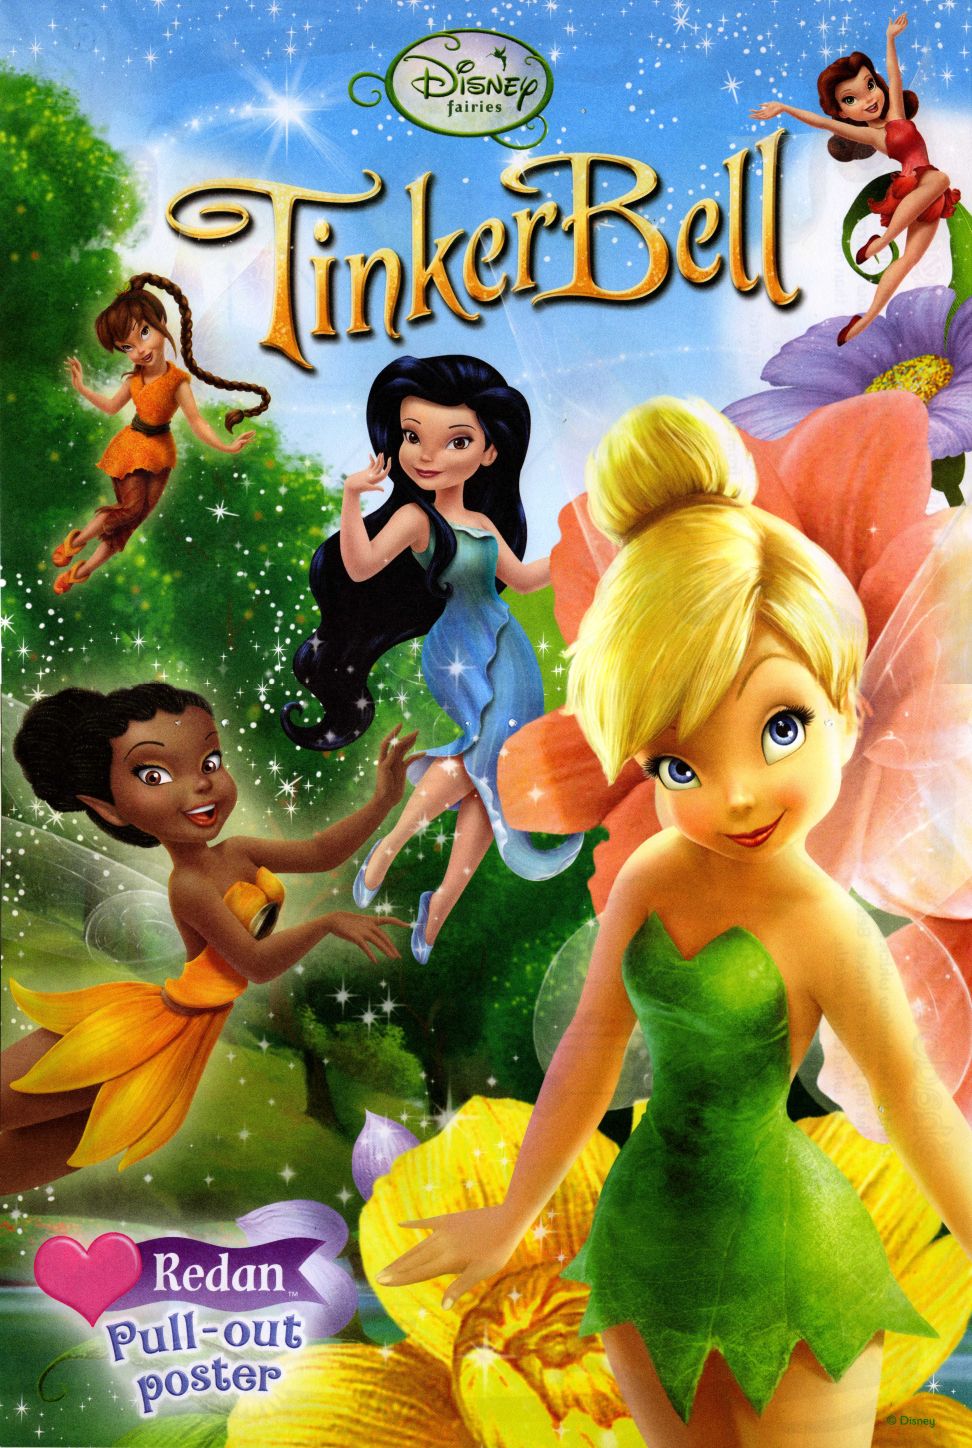 Download Tinker Bell 2008 Full Hd Quality